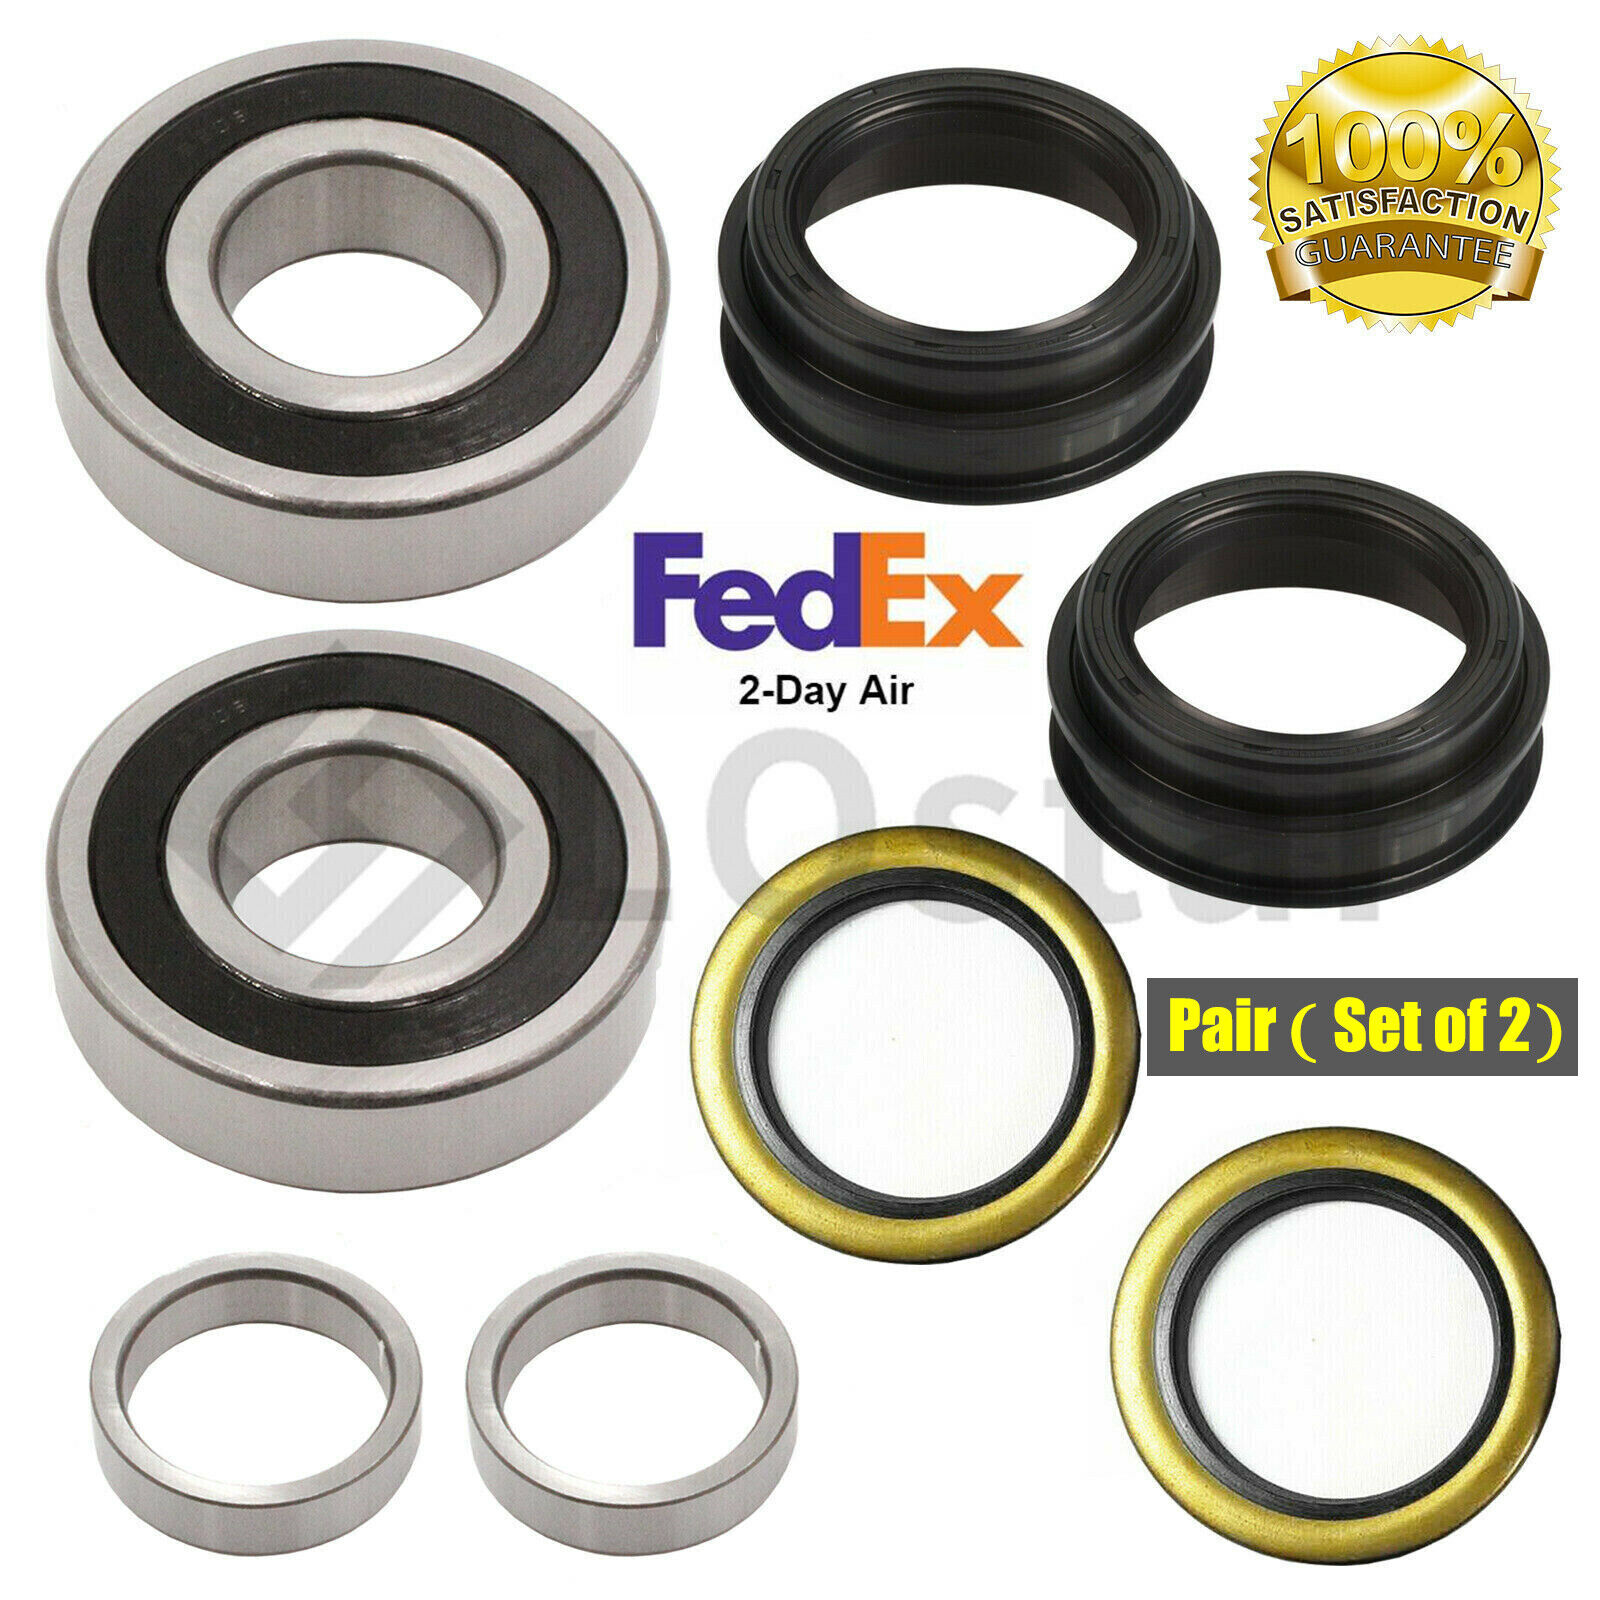 Pair(2) Rear Wheel Bearings Fits for Toyota 4Runner Tacoma T100 Pickup With Seal